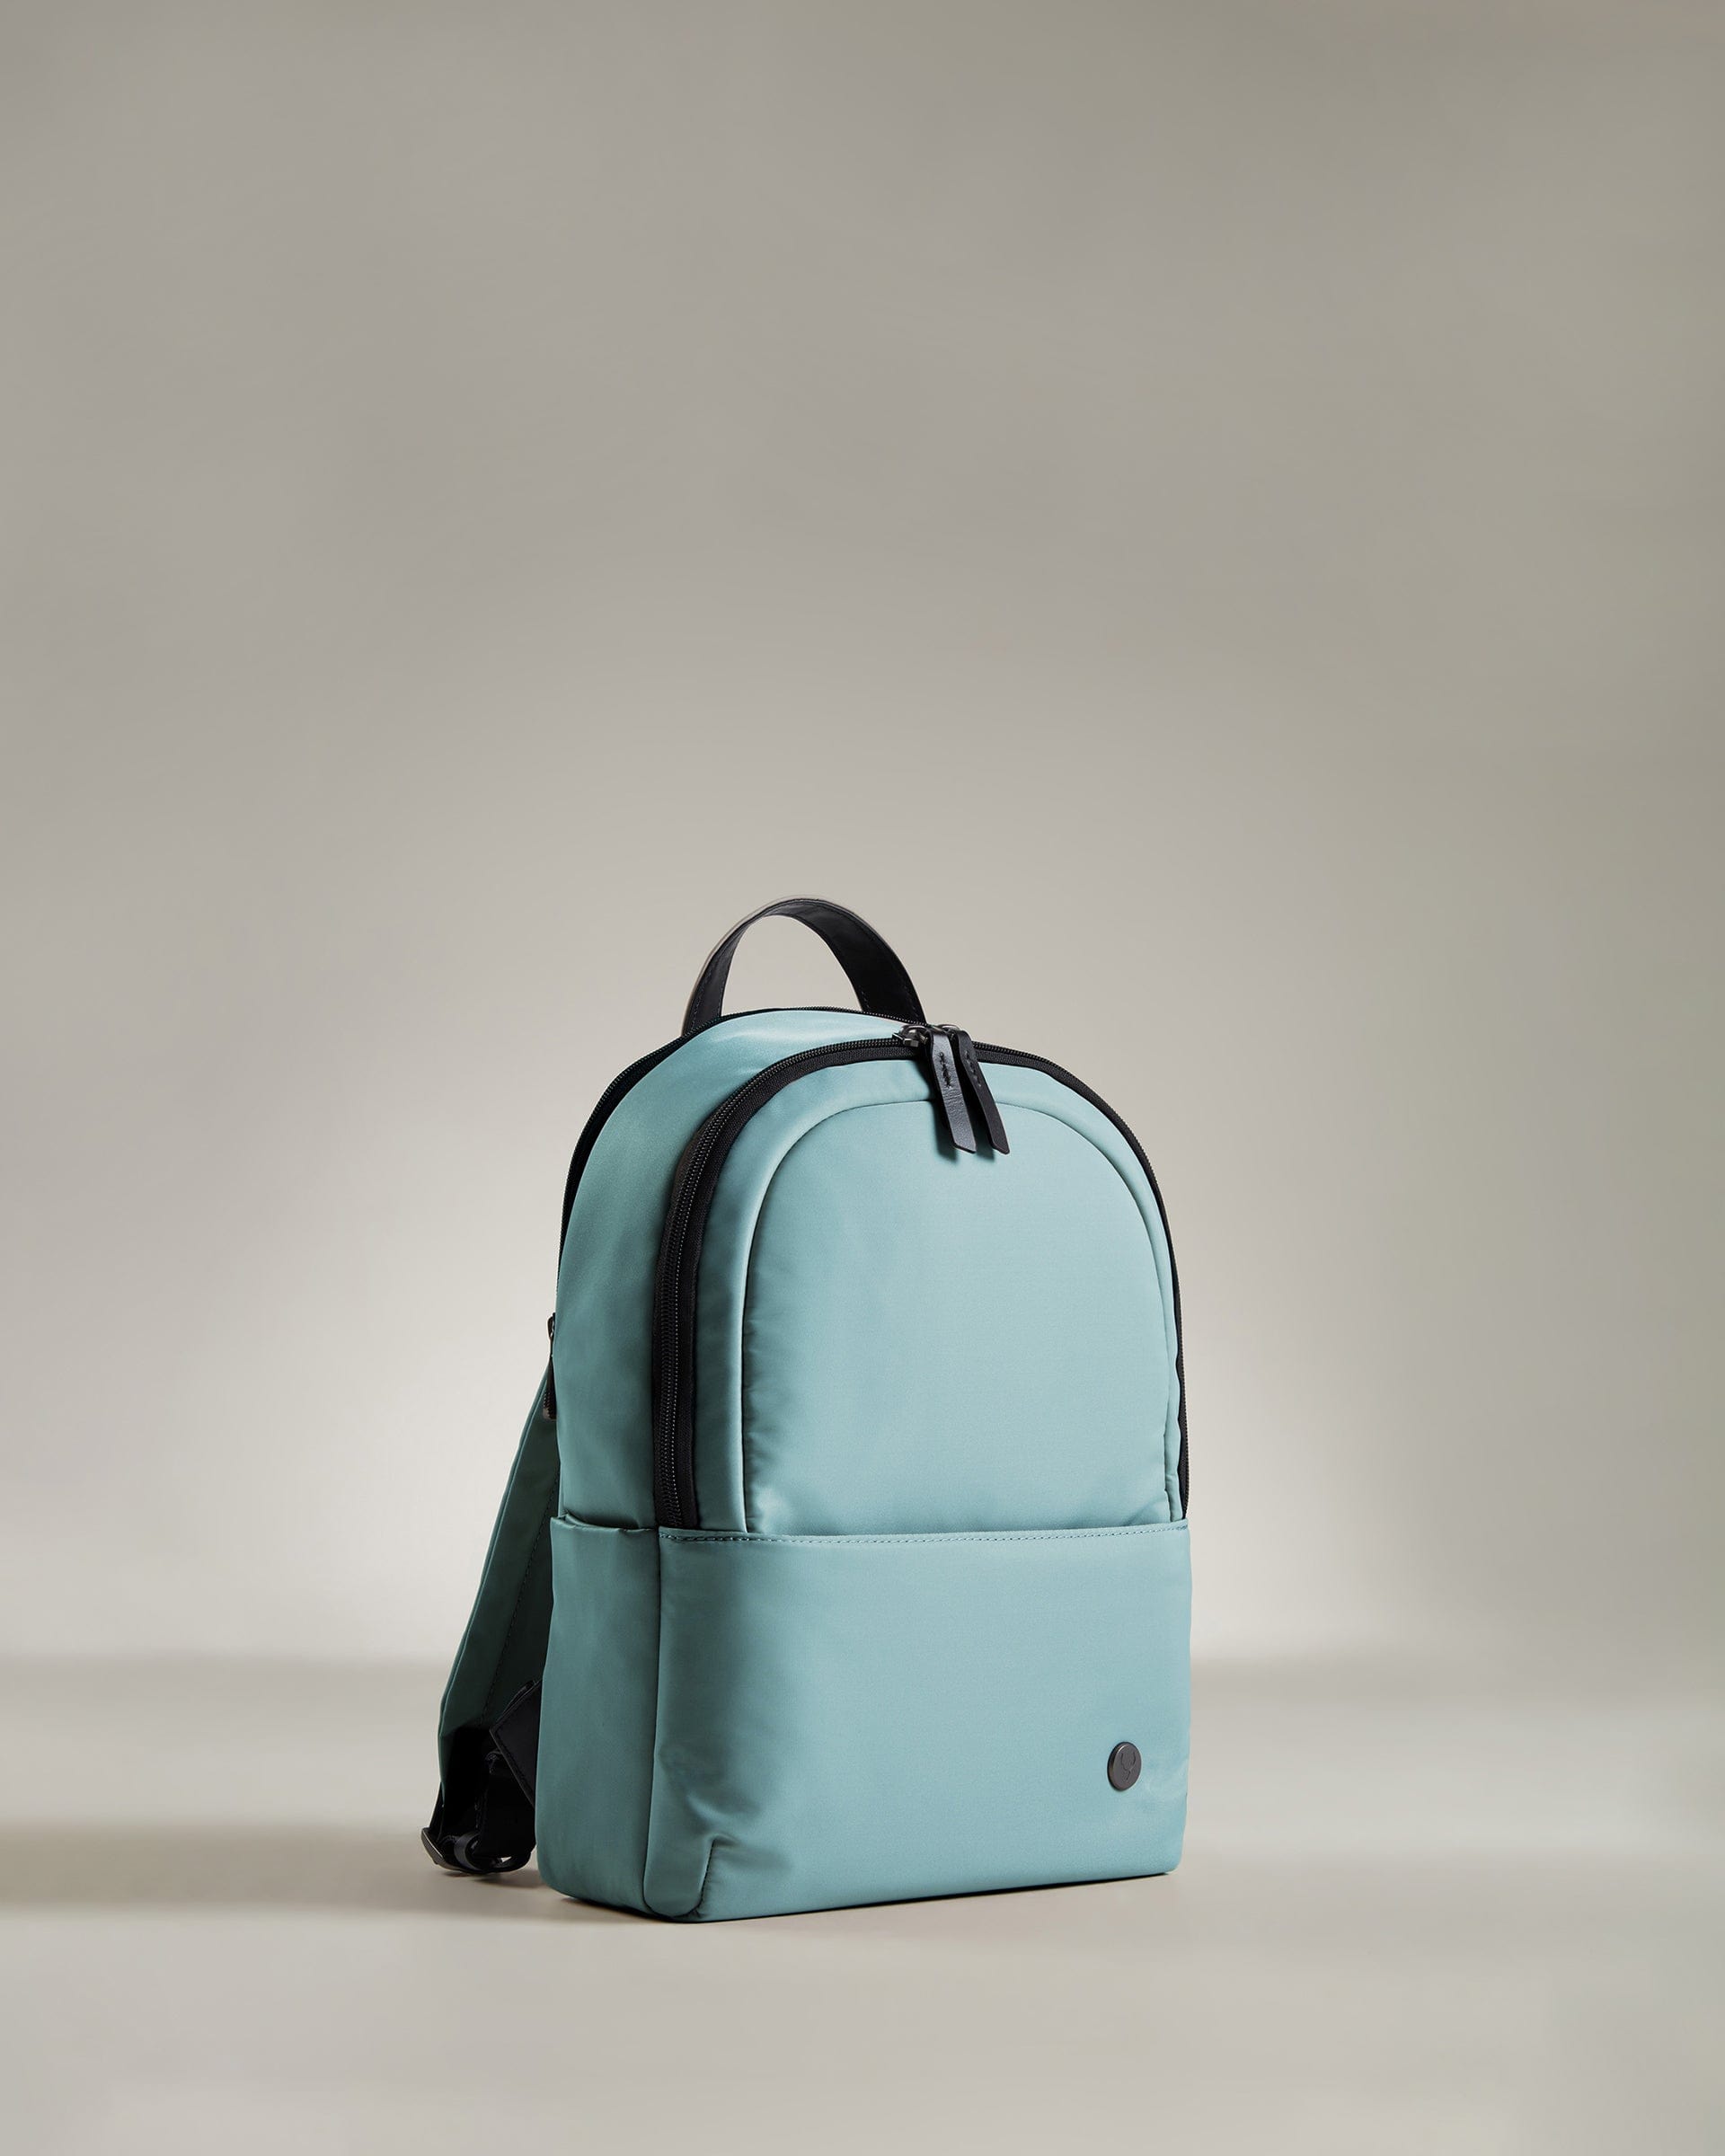 View Antler Chelsea Daypack In Mineral Size 37 x 26 x 12 cm information